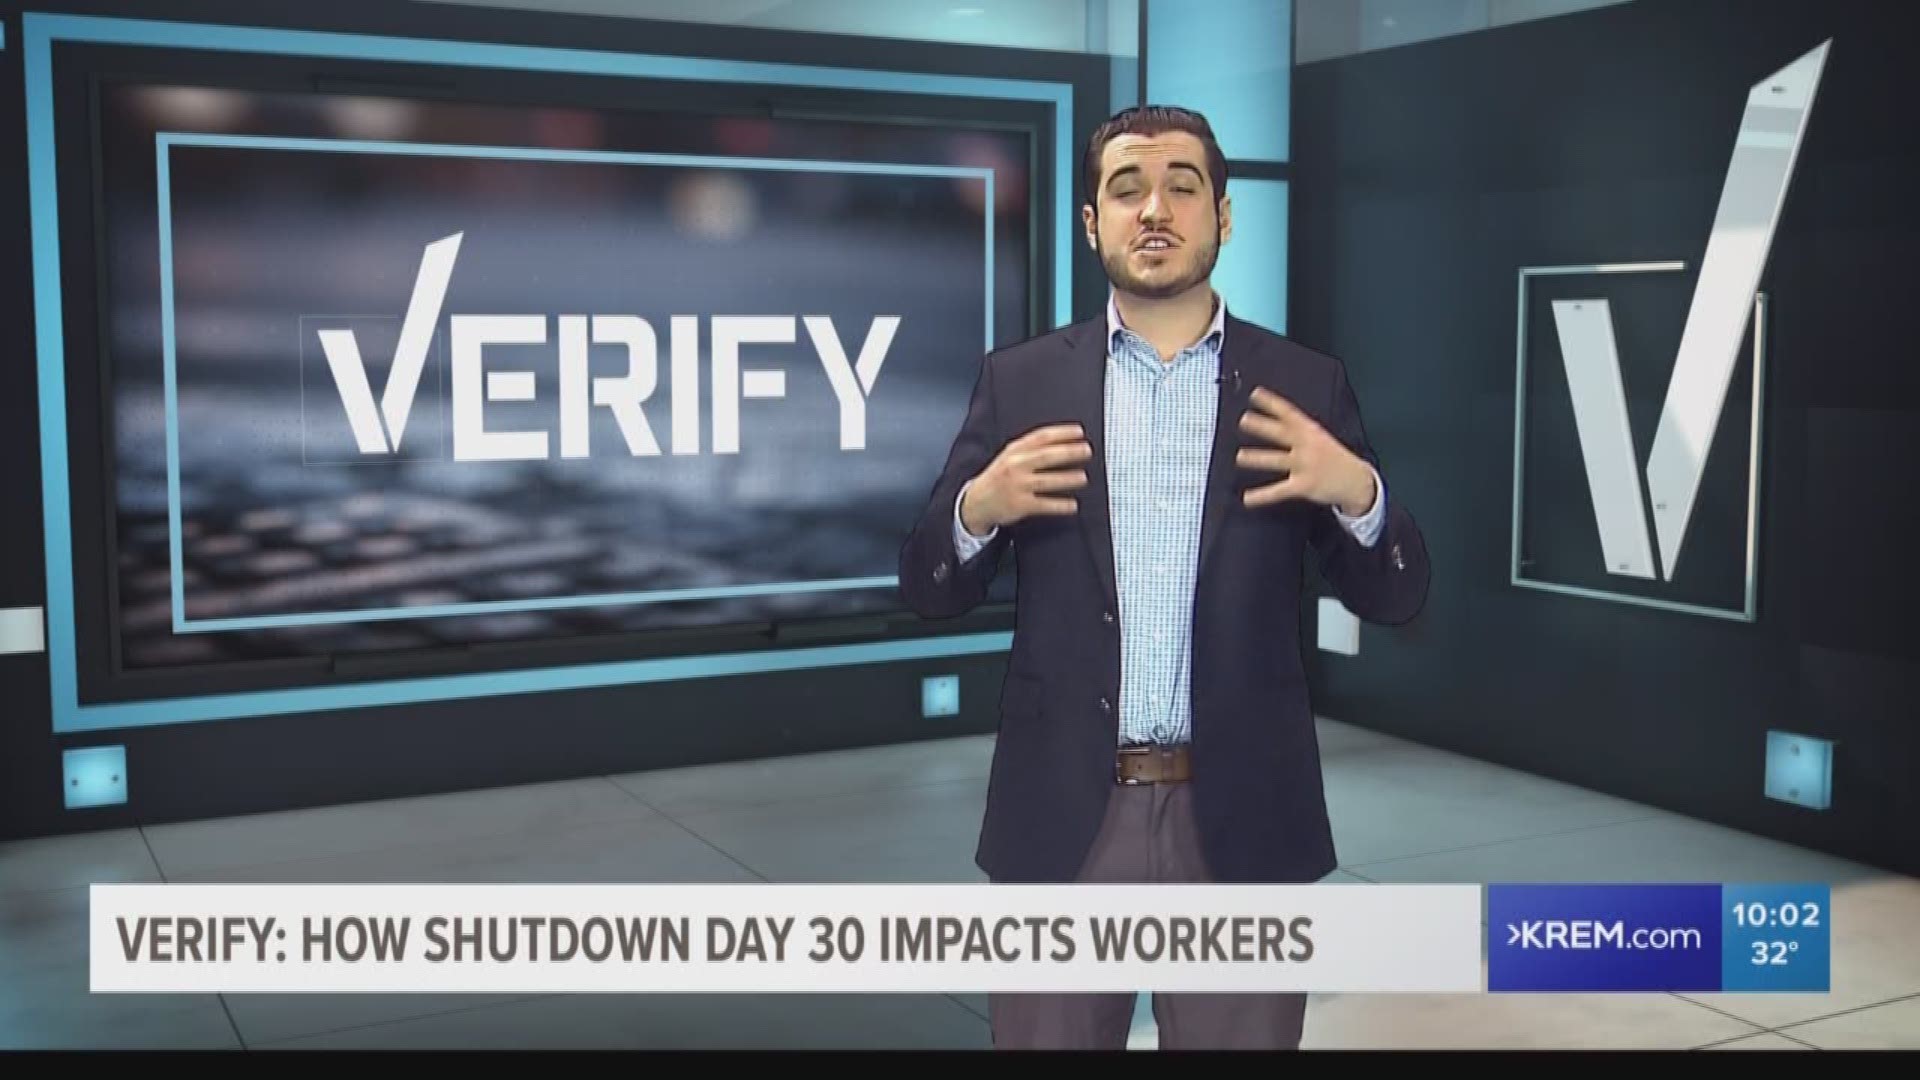 There's a federal law that requires workers who were furloughed for more than 30 must be laid off. In the context of the shutdown, that is not the case.